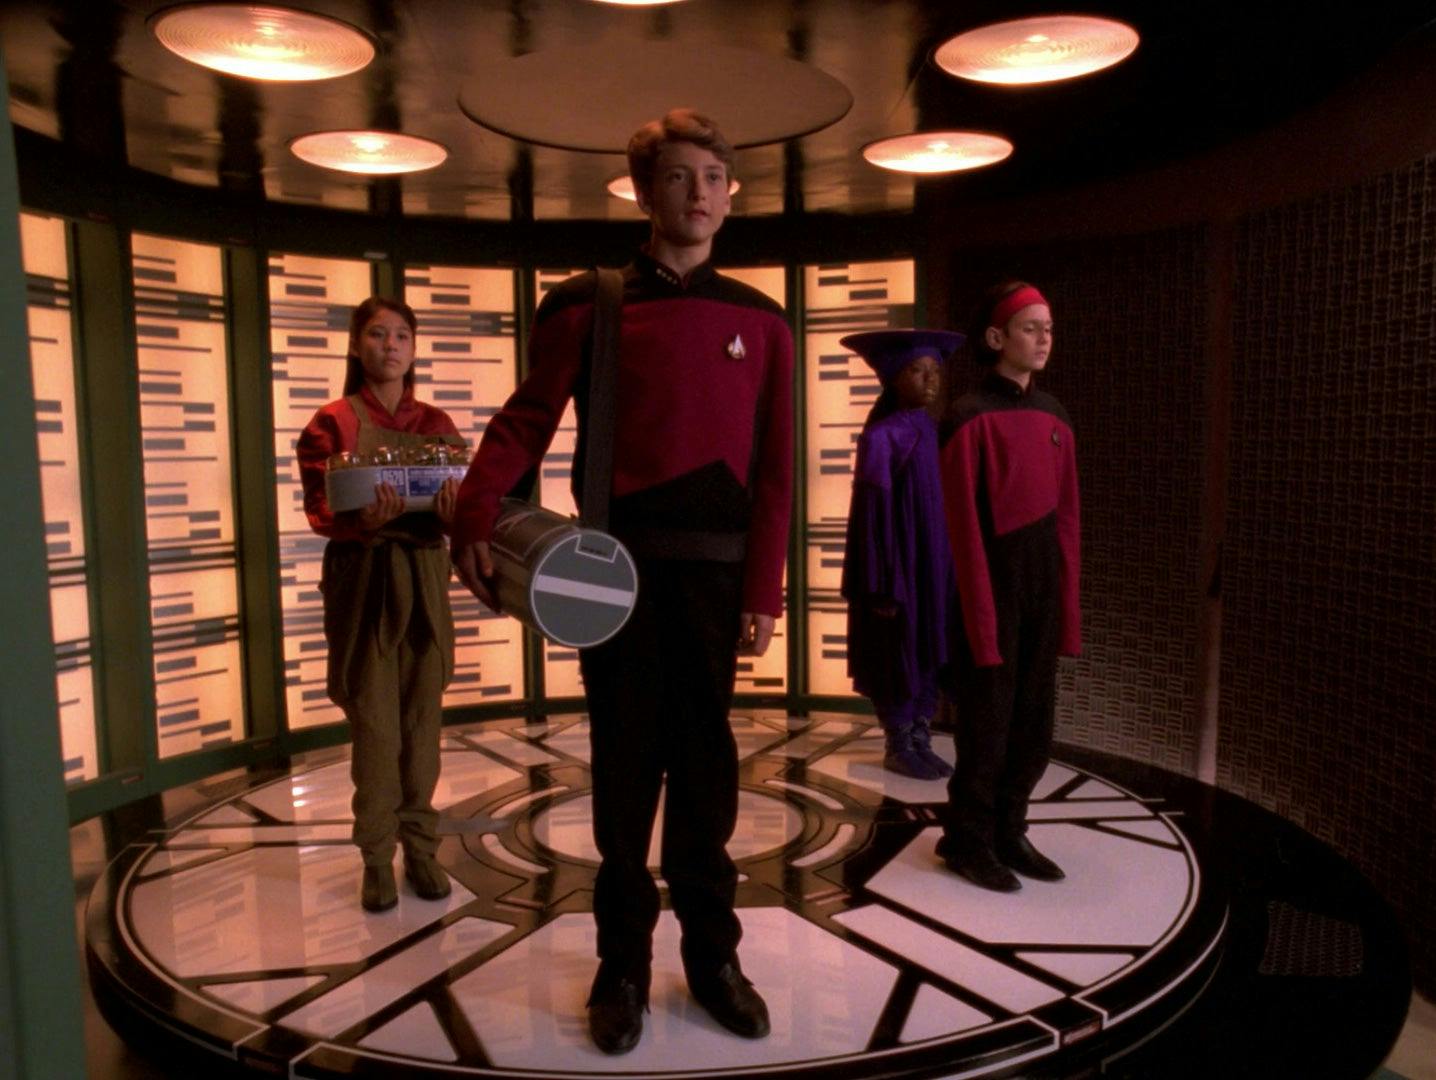 Twelve year old versions of Keiko, Picard, Ro Laren, and Guinan stand on the transporter pad in 'Rascals'